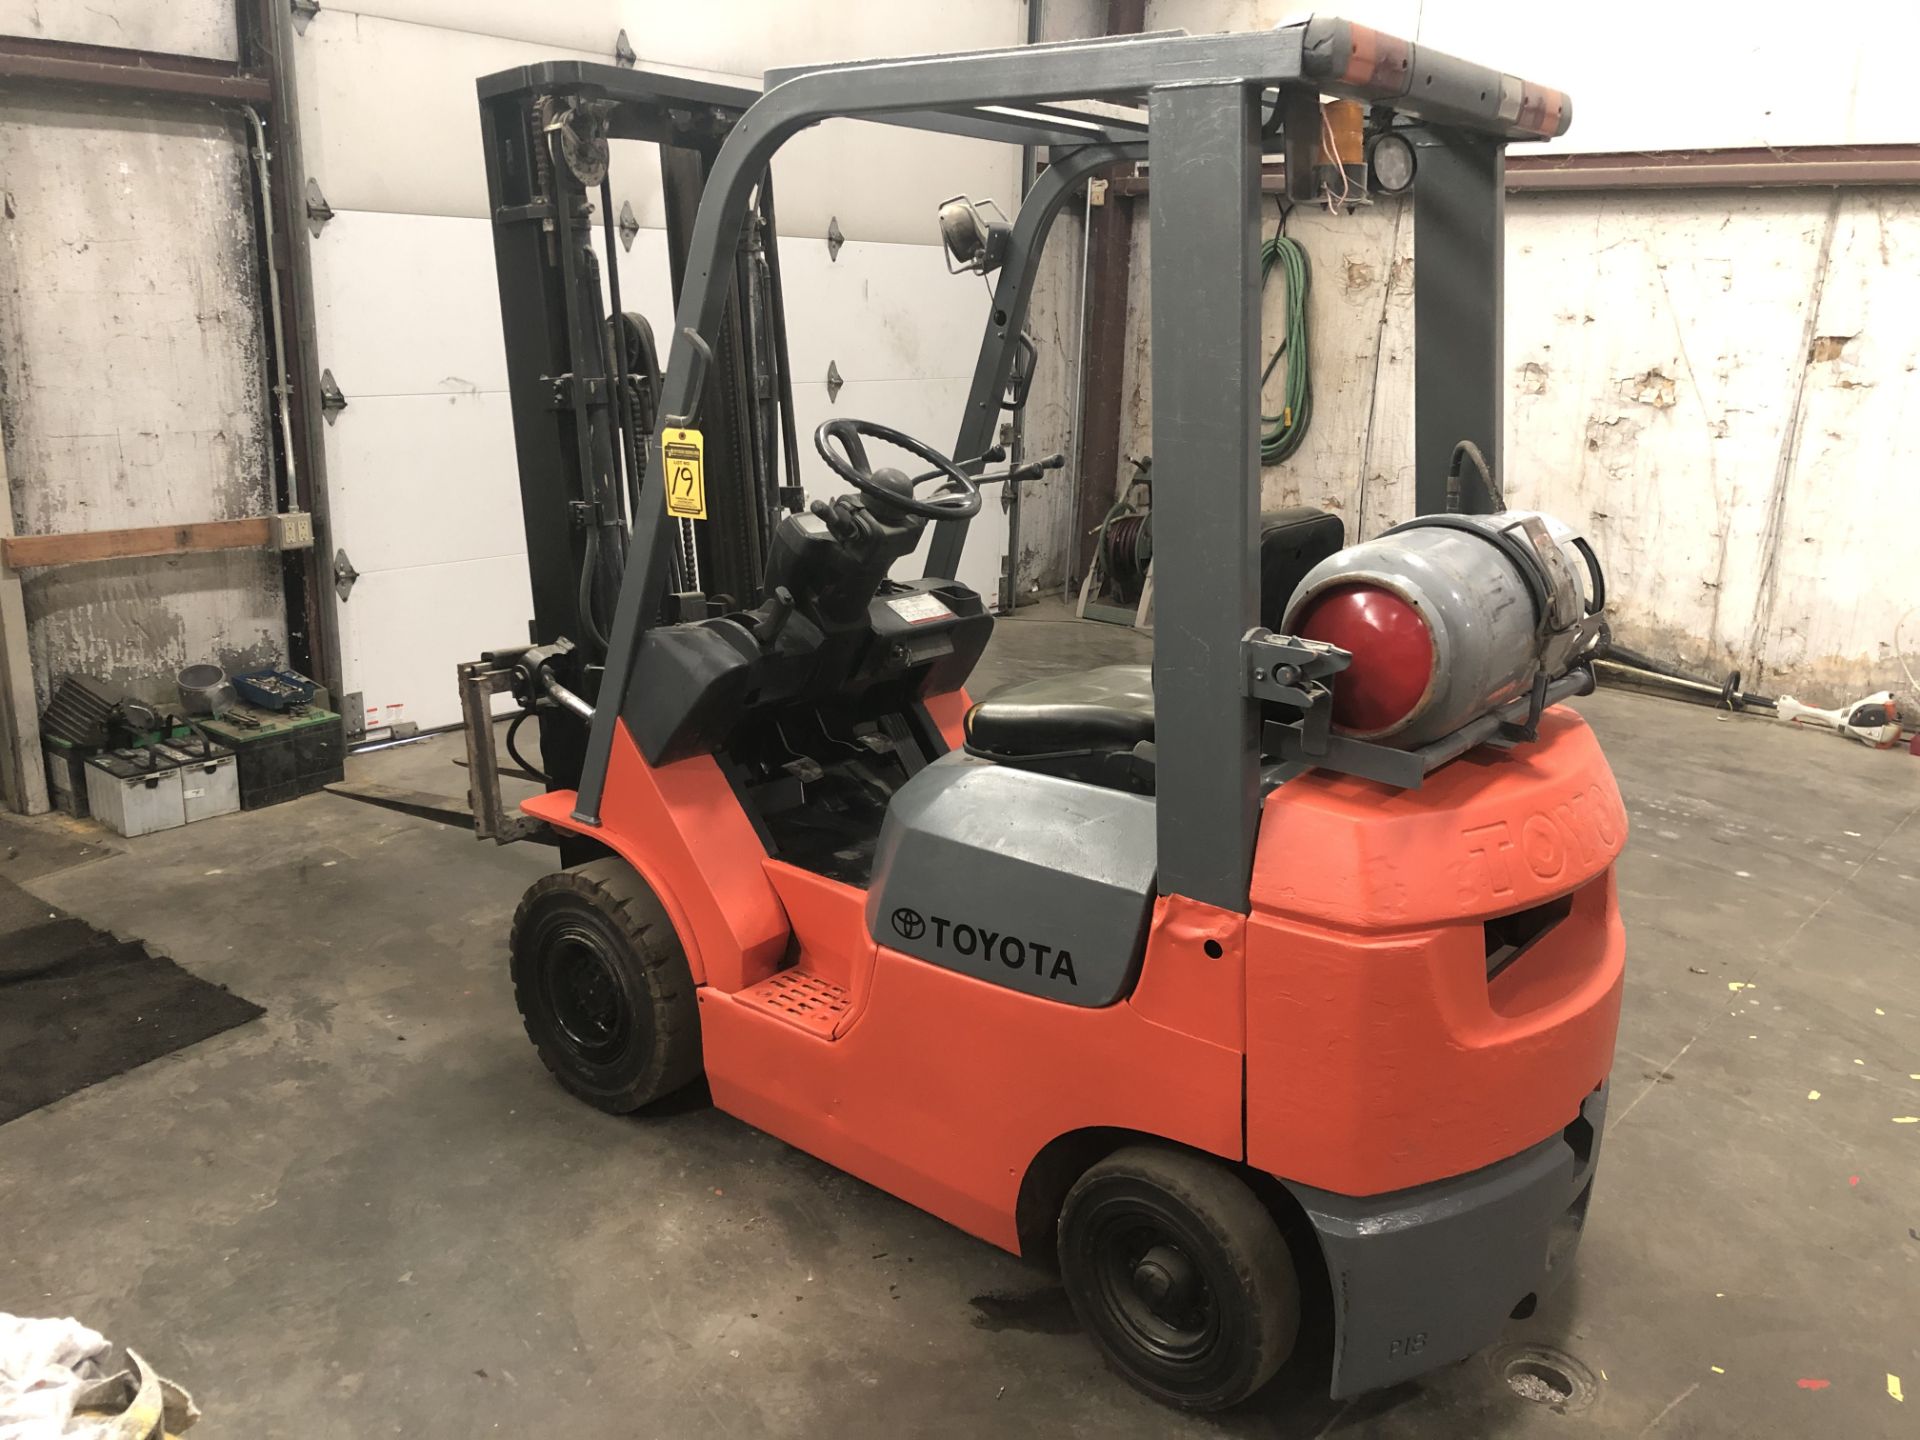 2005 TOYOTA 3,500-LB CAPACITY FORKLIFT, MODEL: 7FGU18, S/N: 65917, LPG *FORKS WON'T MOVE UP OR DOWN* - Image 3 of 5